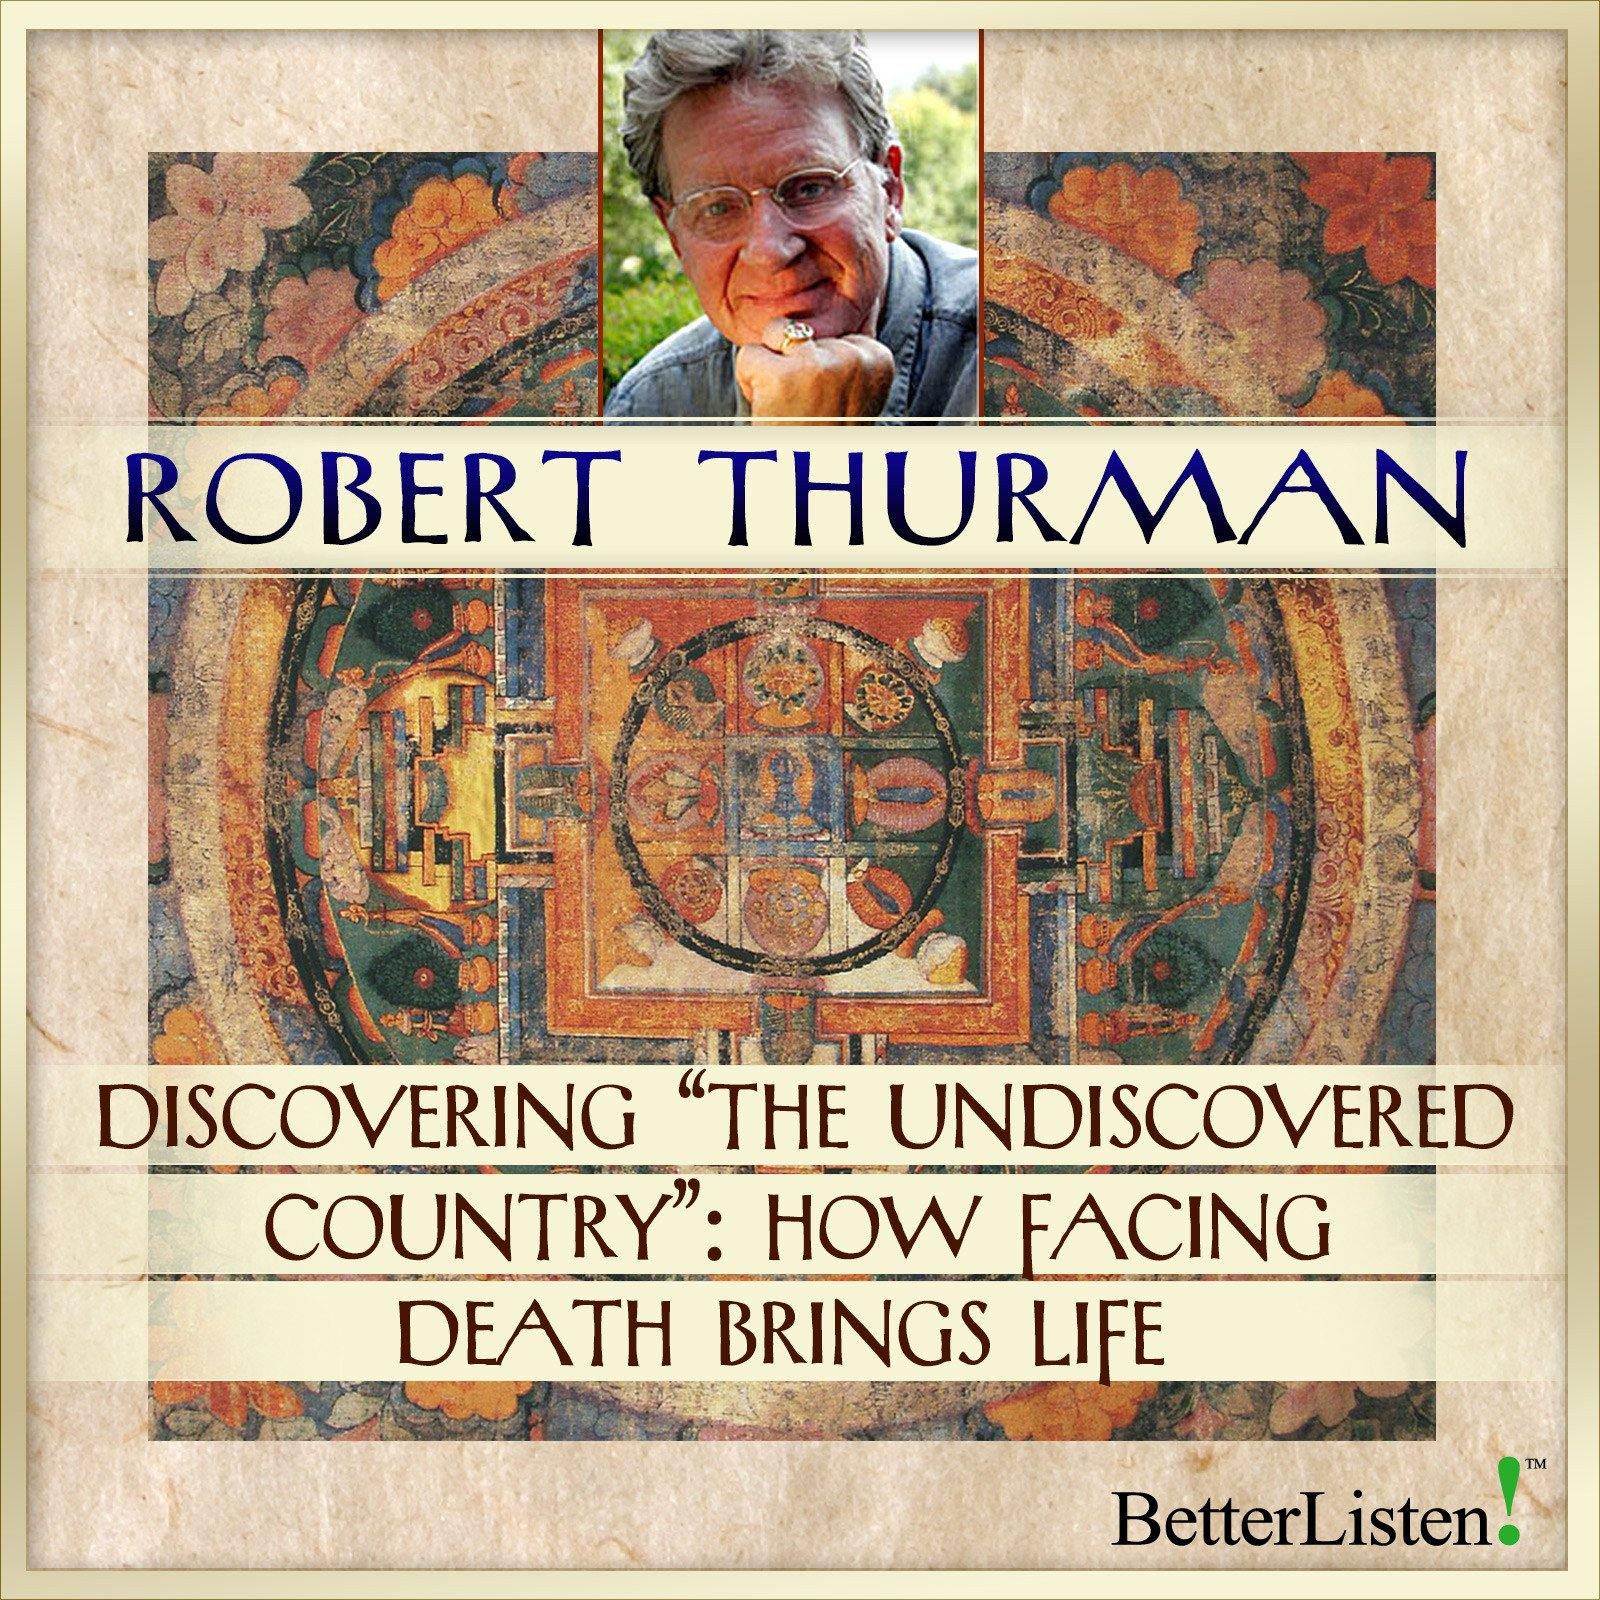 Discovering "The Undiscovered Country:" How Facing Death Brings Life with Robert Thurman Audio Program Robert Thurman - BetterListen!